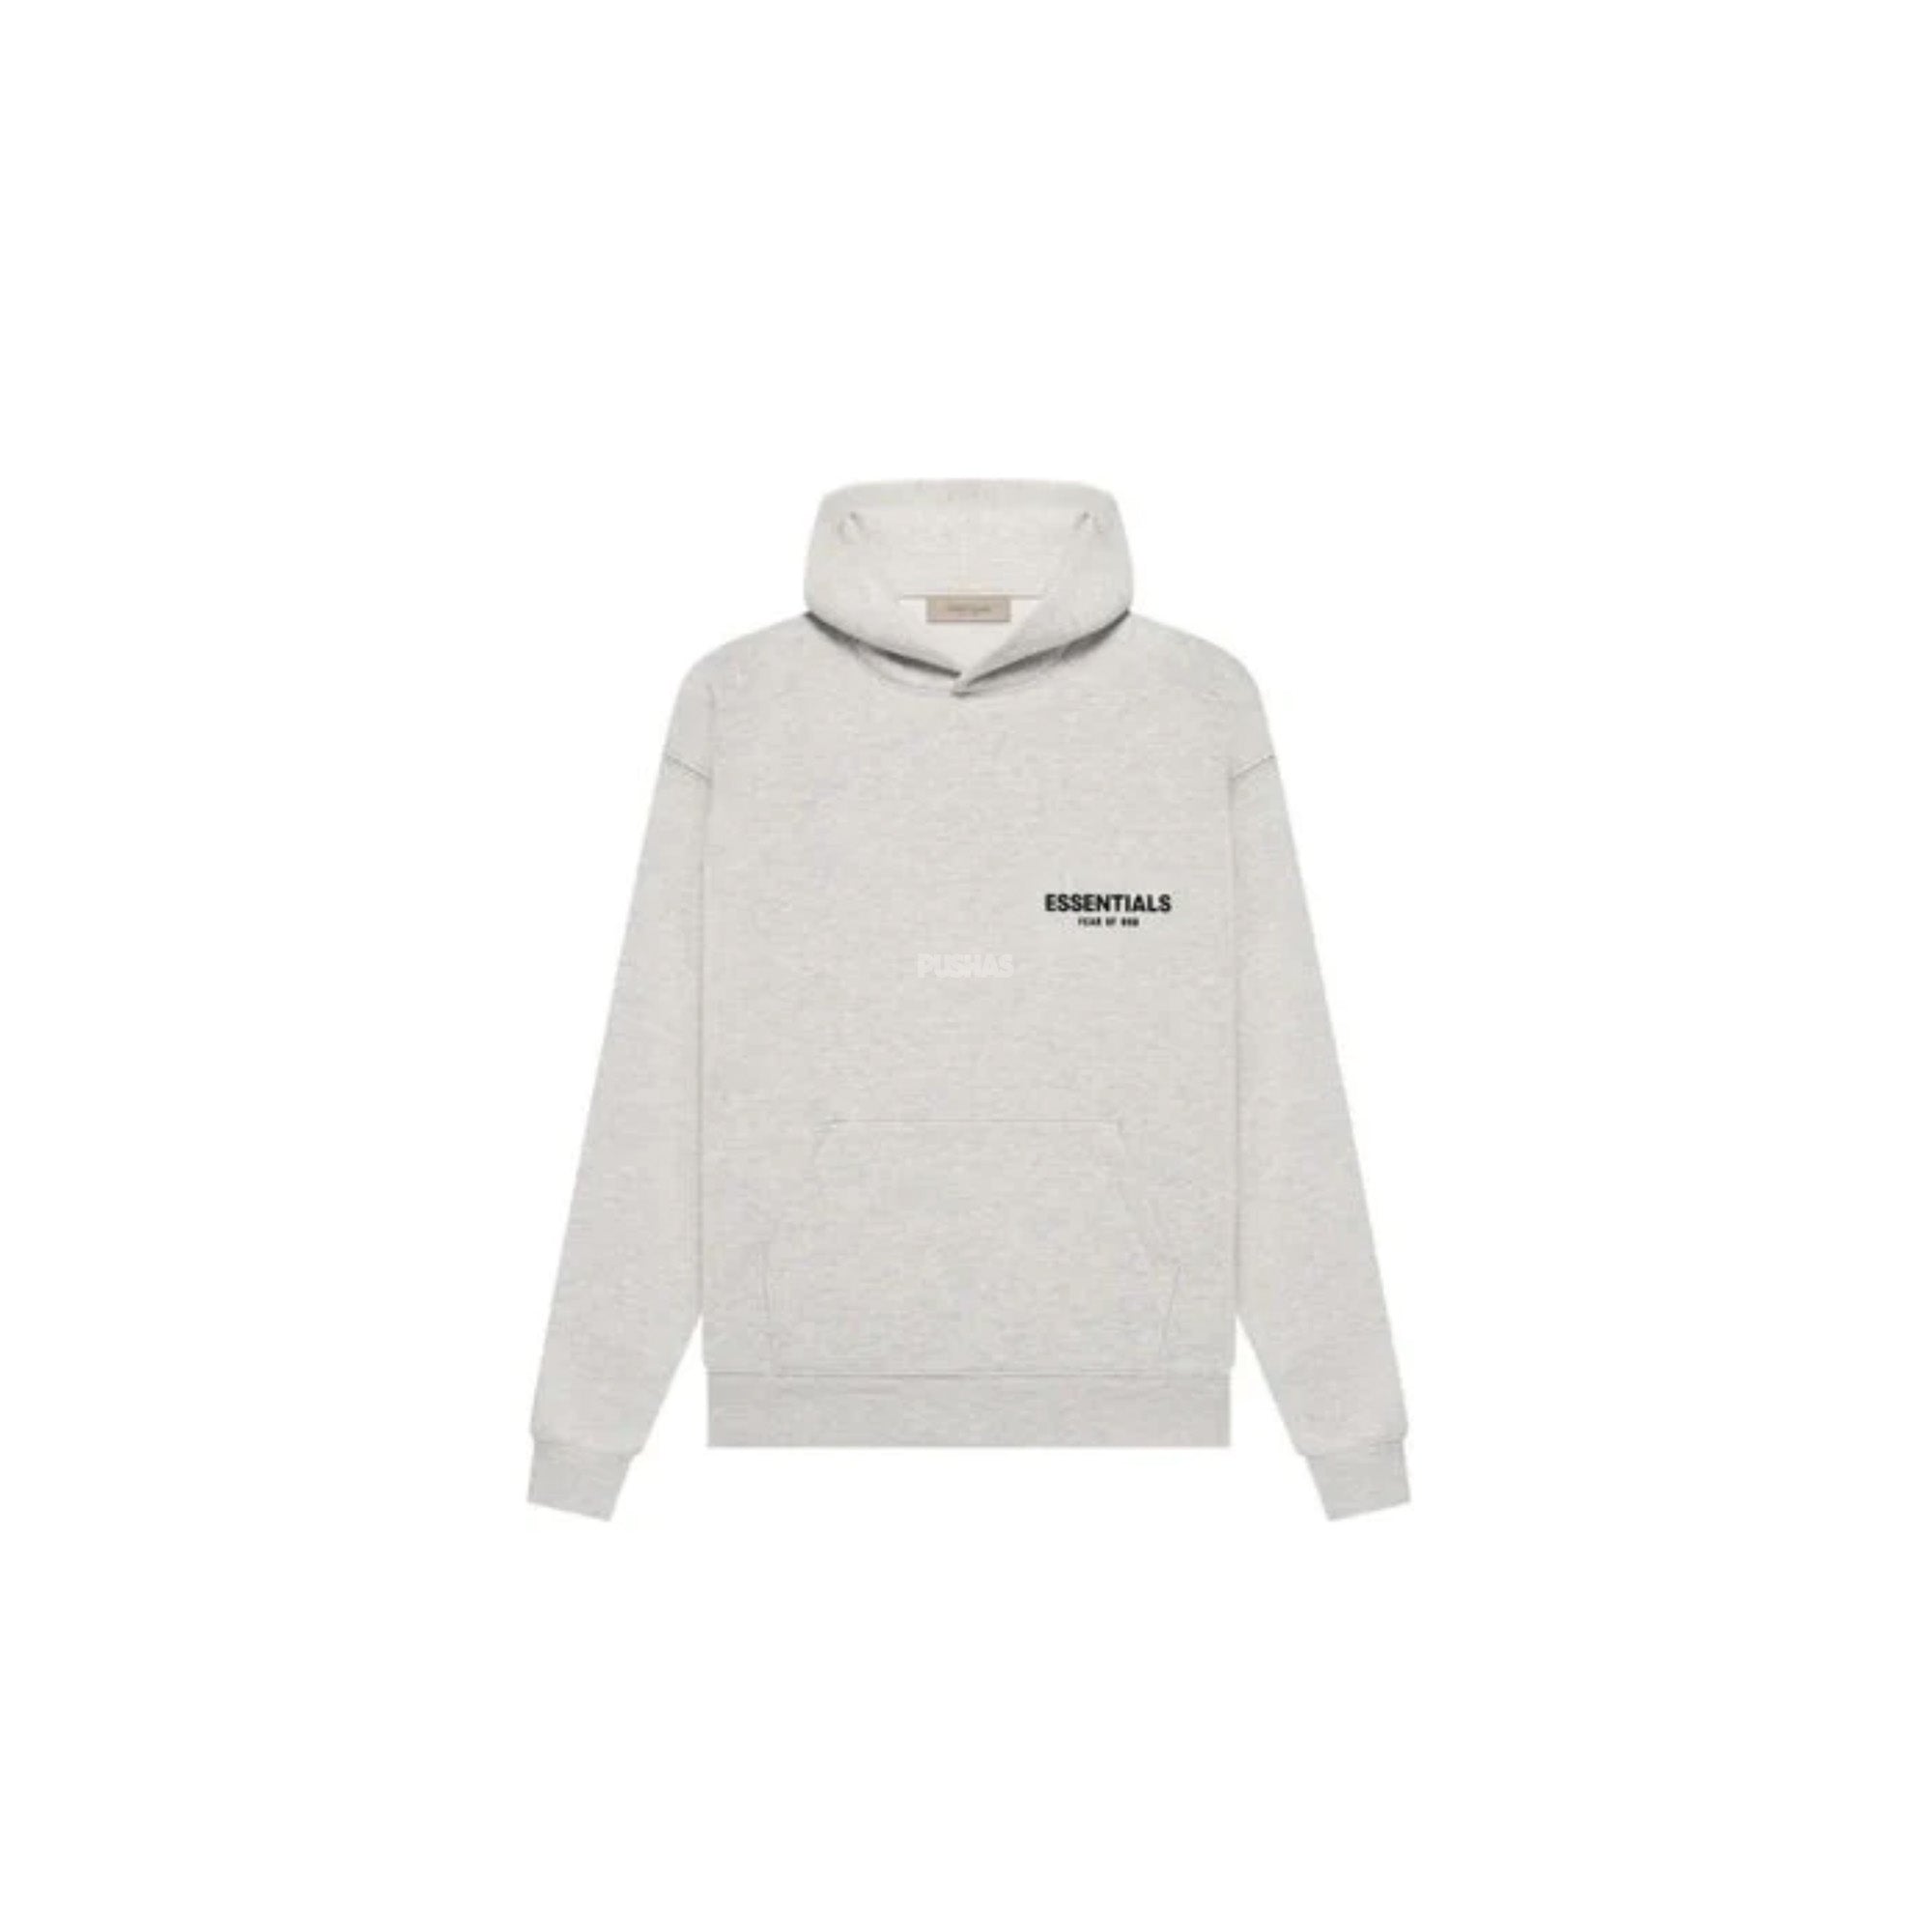 Image of ESSENTIALS Pull-Over Hoodie 'Light Oatmeal' (SS22 / FW22)